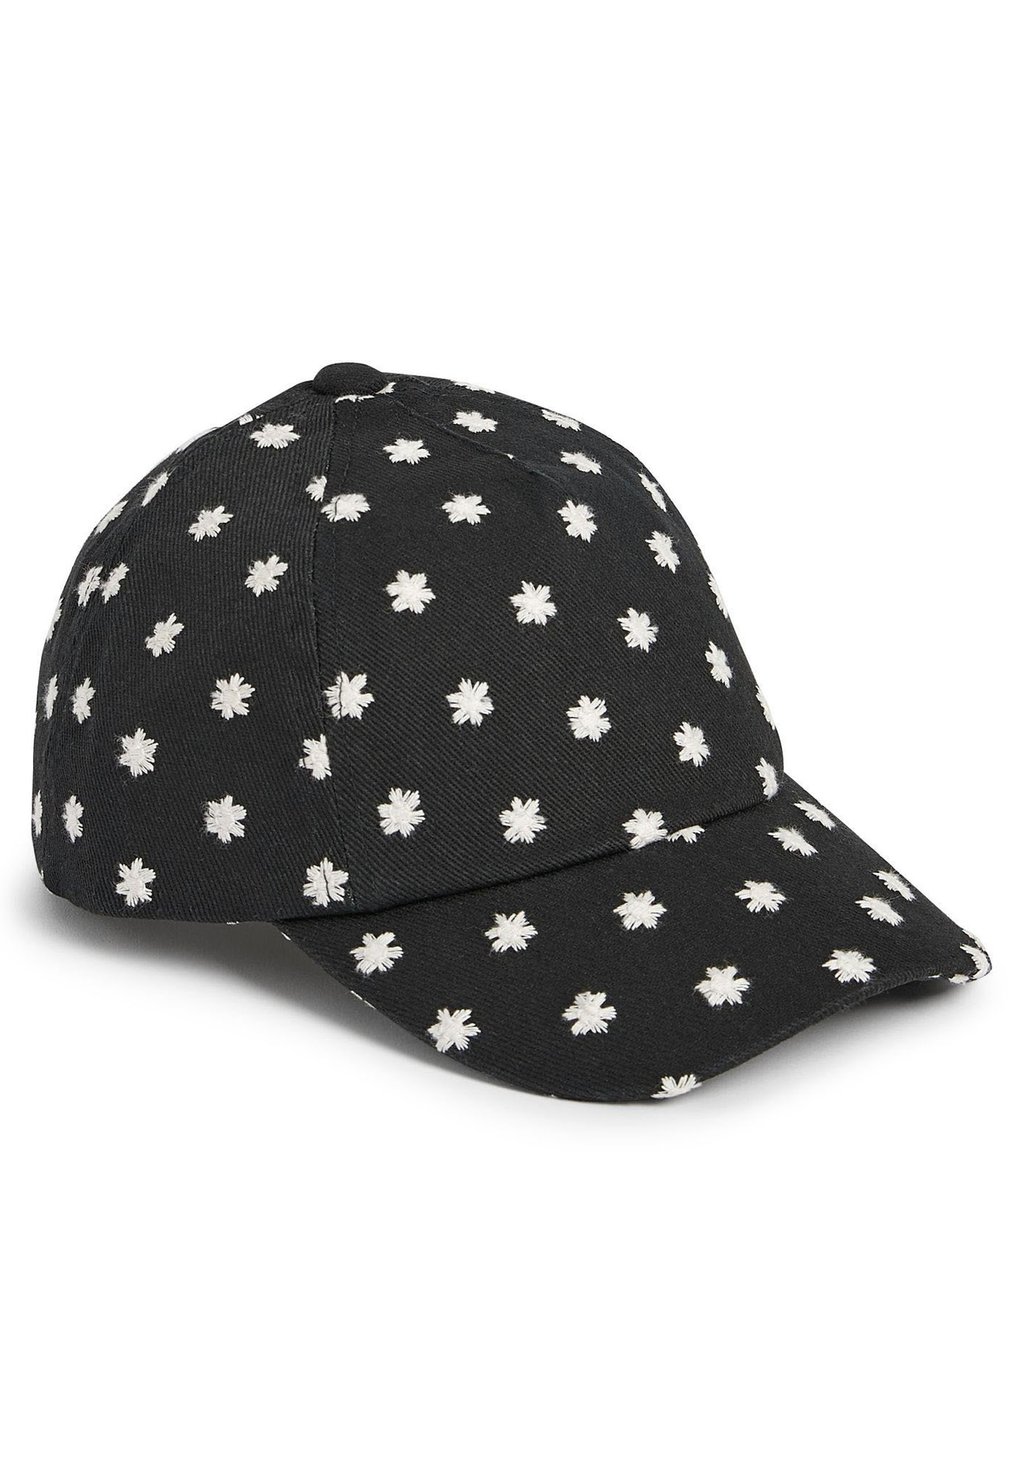 Кепка Embroidered Cap Next, цвет black daisy embroidered